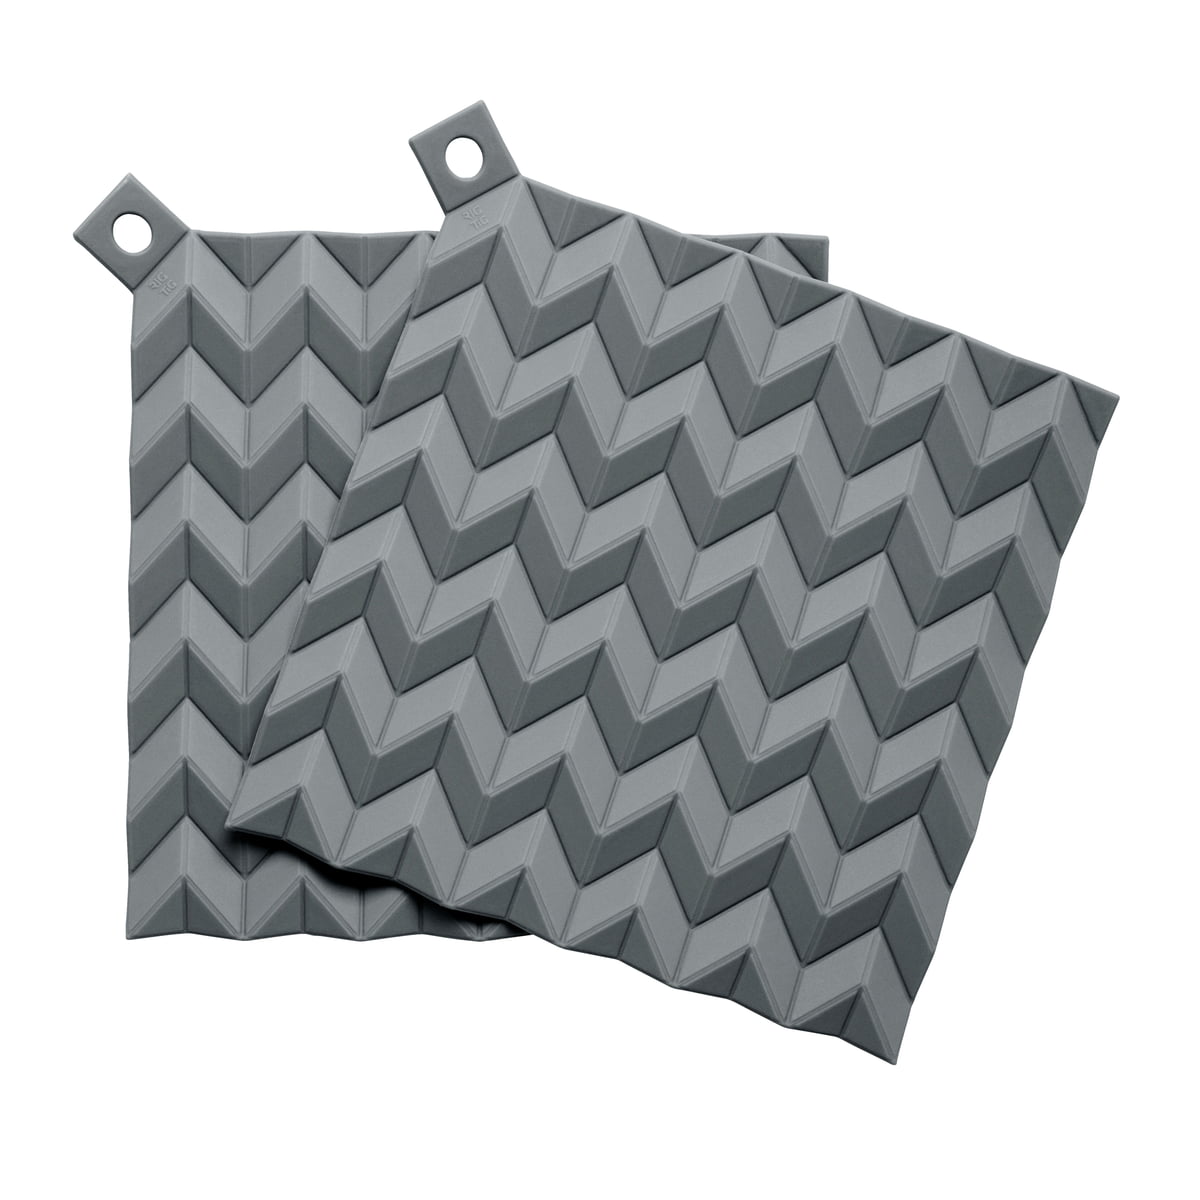 Rig TIG Hold-On Pot Holders, Grey